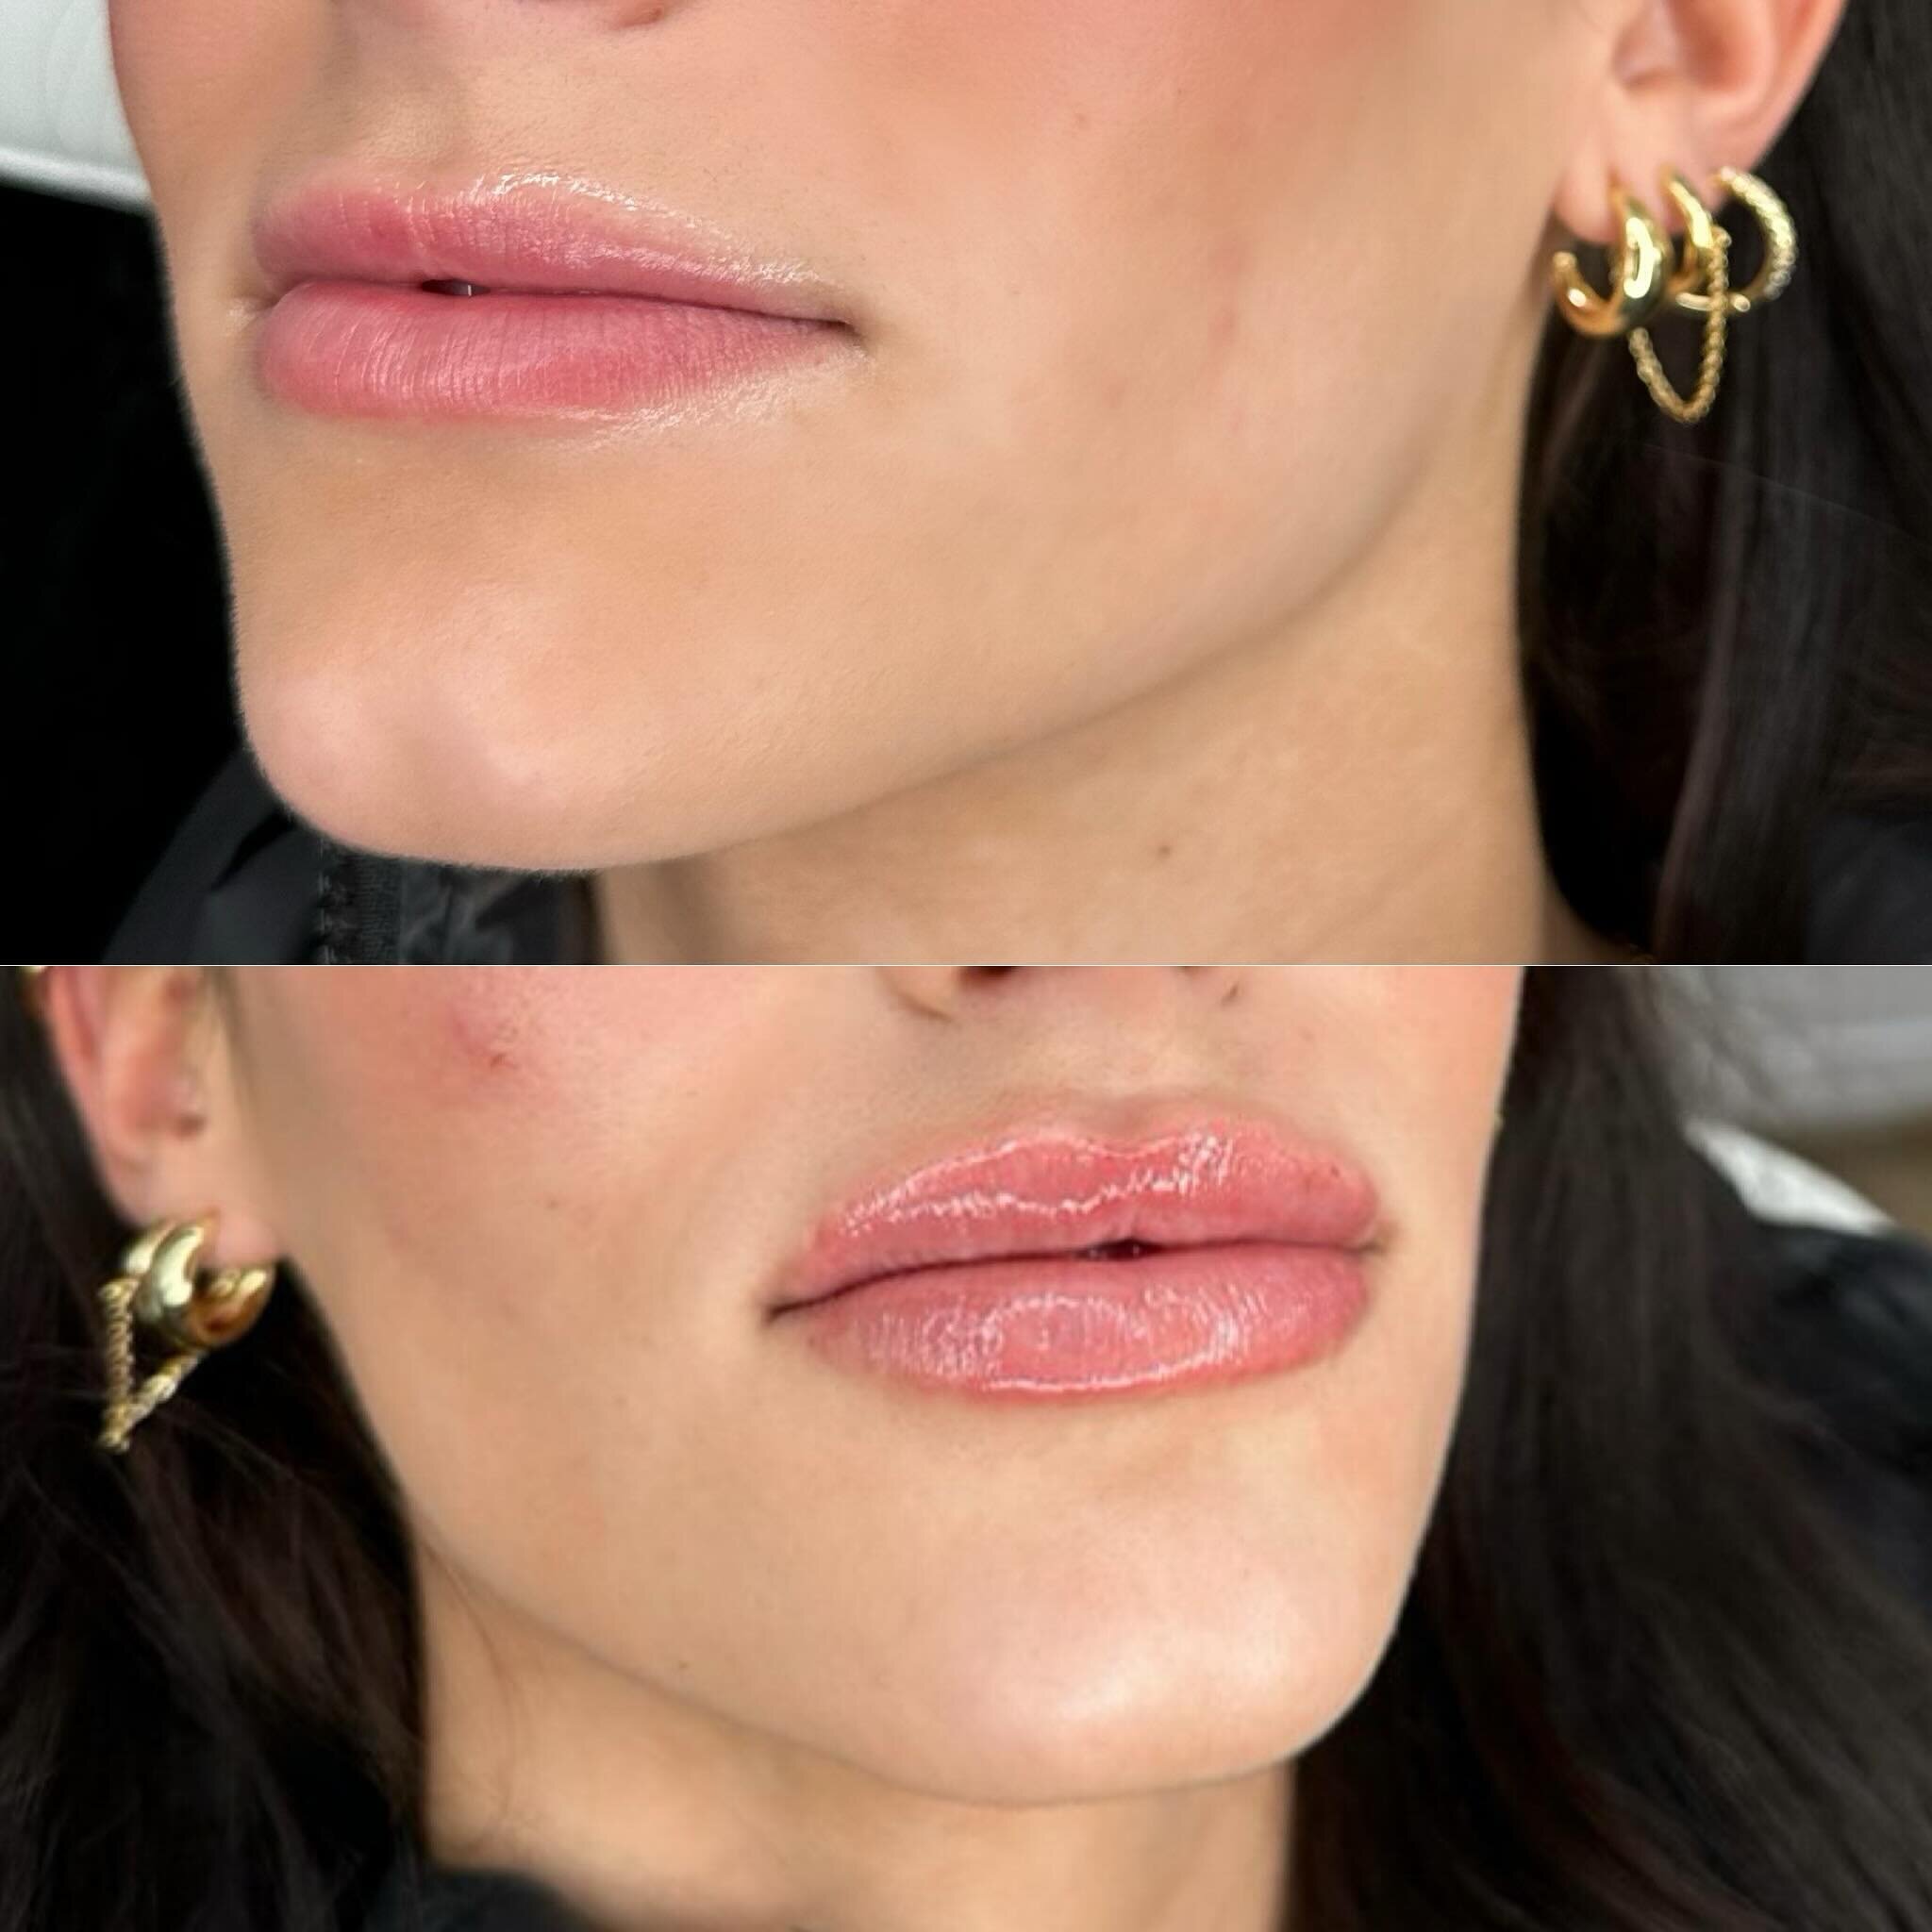 BEFORE lip filler and immediately AFTER one syringe 👄💉 

Lip filler is the perfect solution to creating symmetry, definition, volume, and self-confidence! 💄

Lip filler does not have to look unnatural. It can be so natural-looking and compliment t